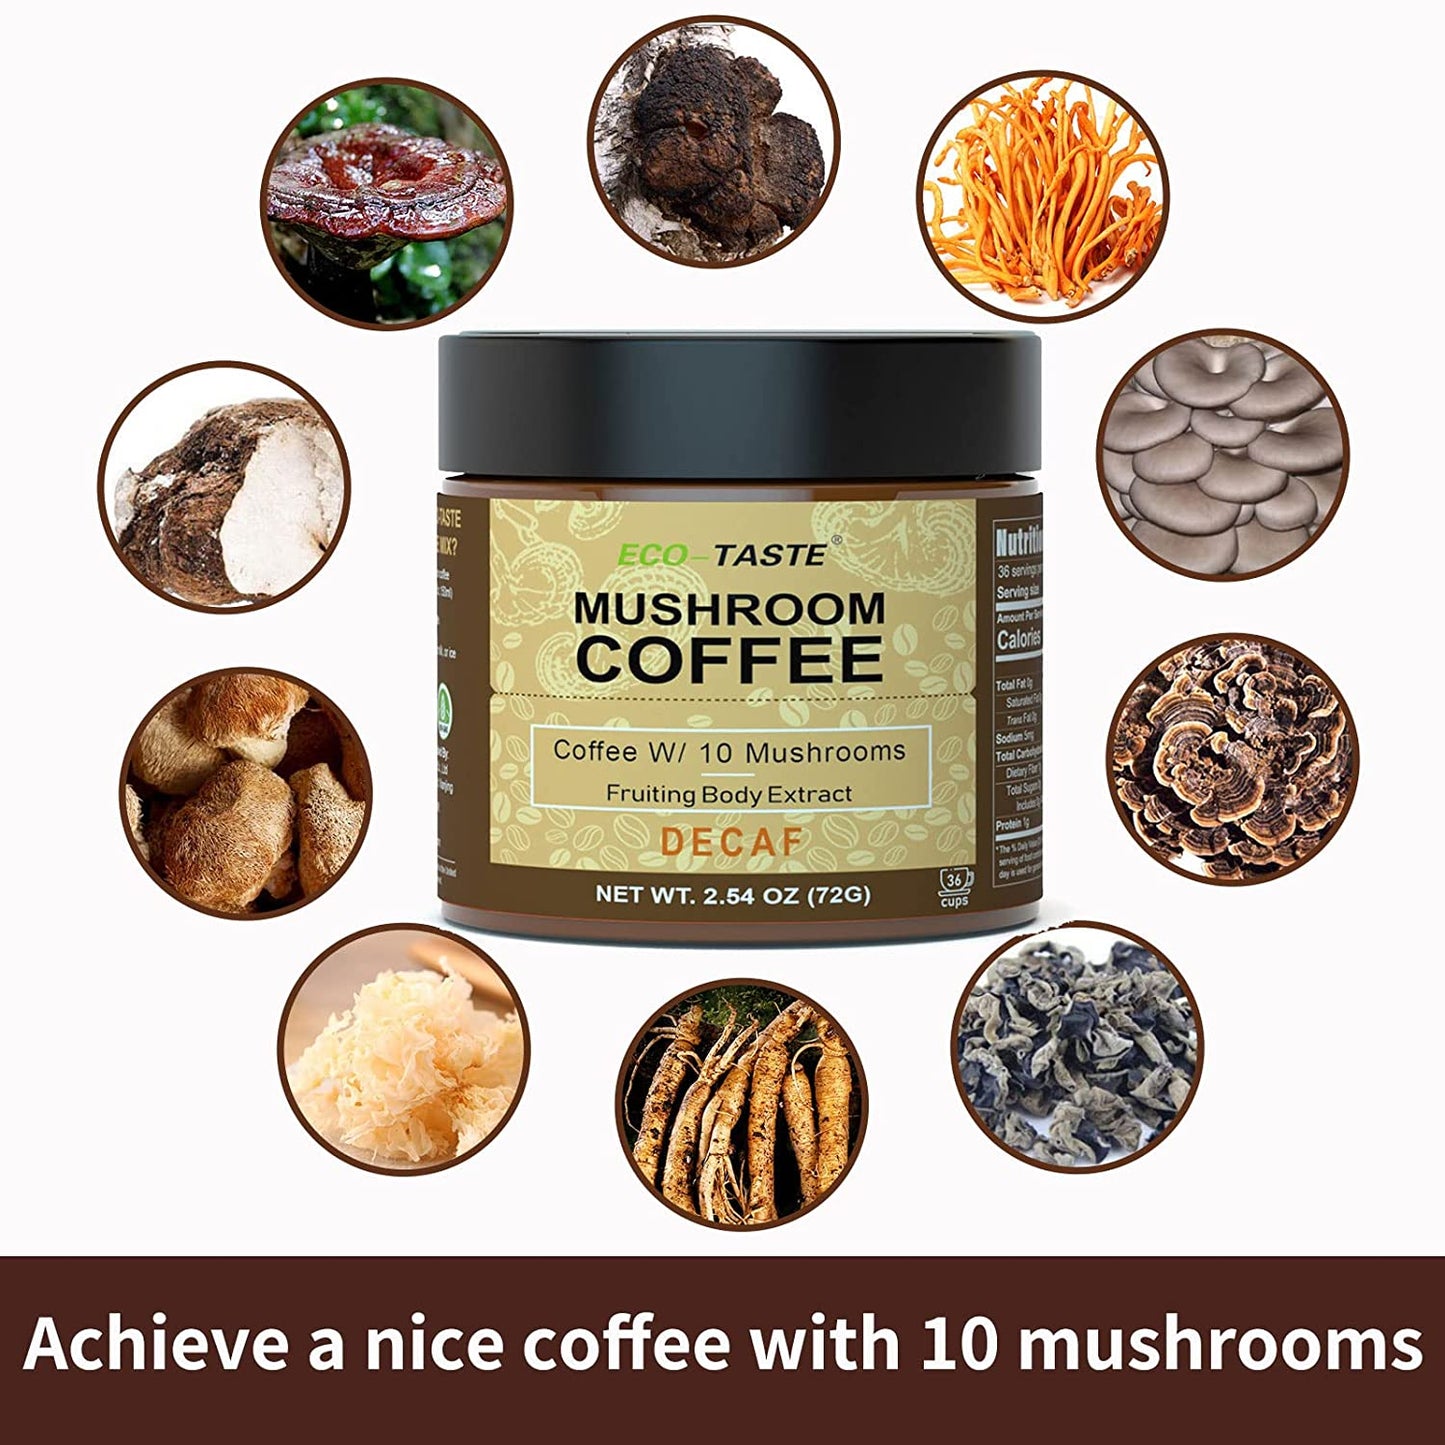 Decaf Mushroom Coffee - 36 Servings, Instant Coffee Mix Includes 10 Mushrooms Extract Powder 2.12oz